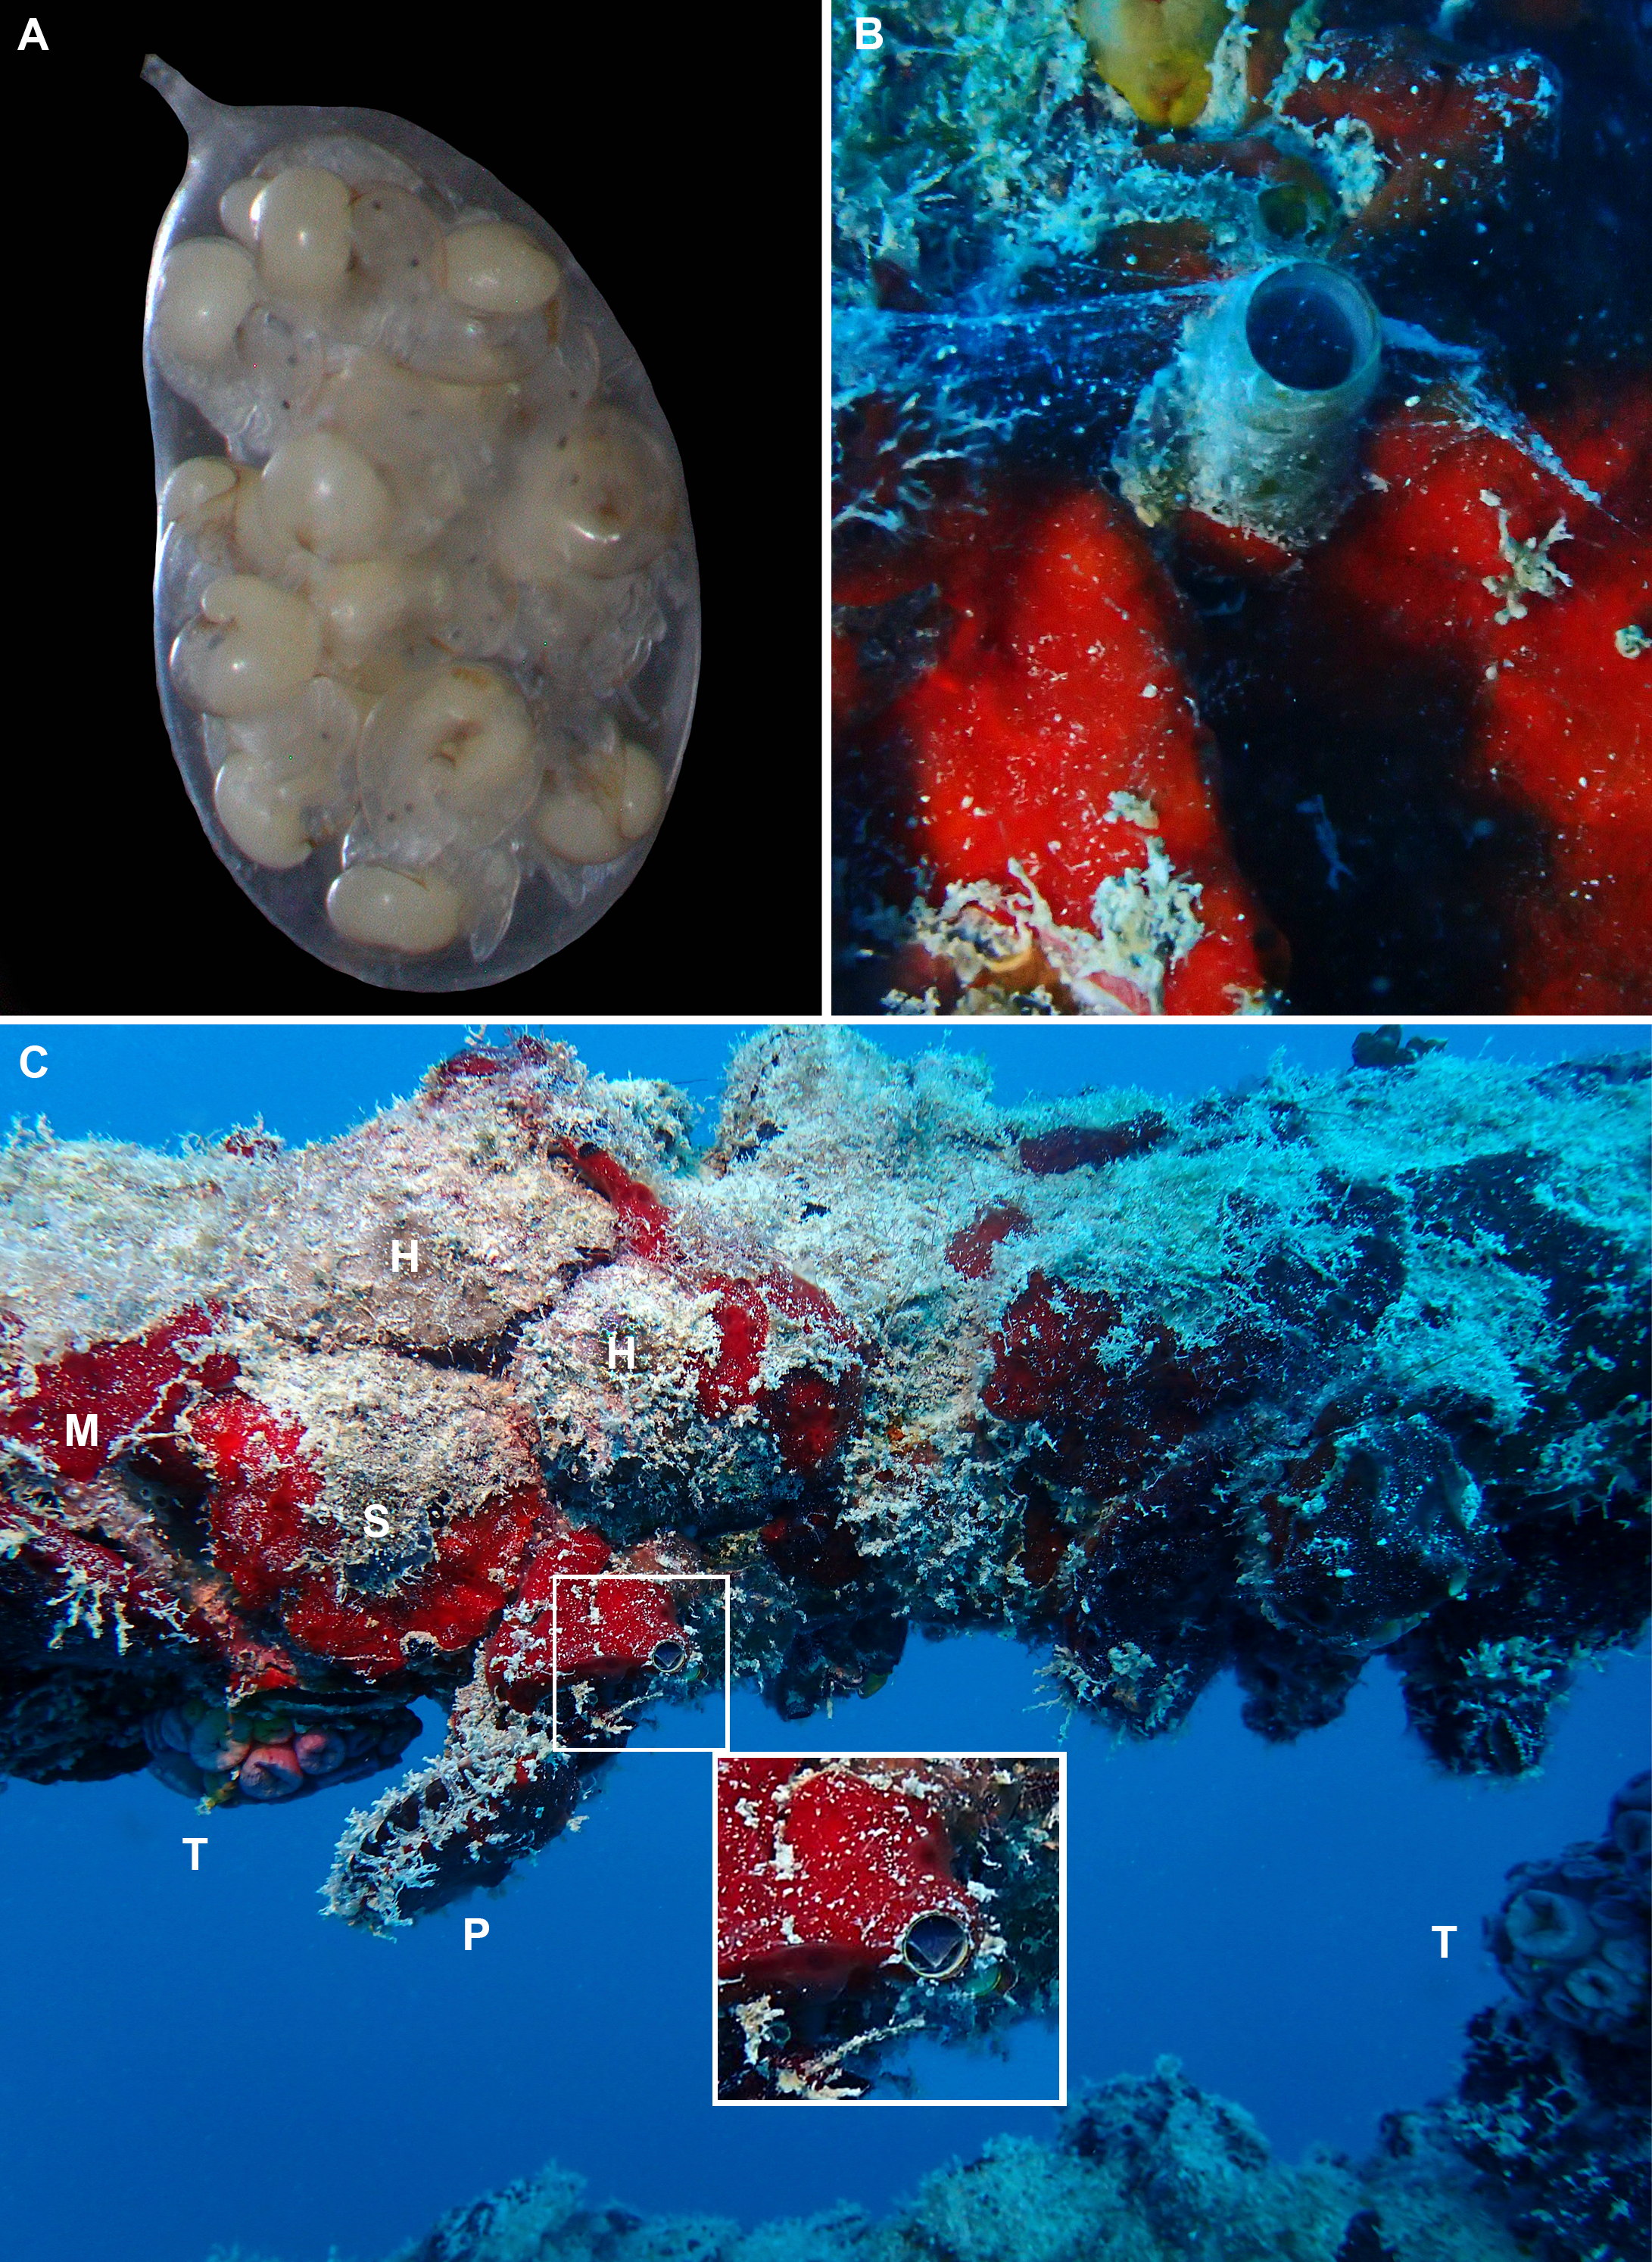 Non-native molluscan colonizers on deliberately placed shipwrecks in the Florida Keys, with description of a new species of potentially invasive worm-snail (Gastropoda Vermetidae) PeerJ